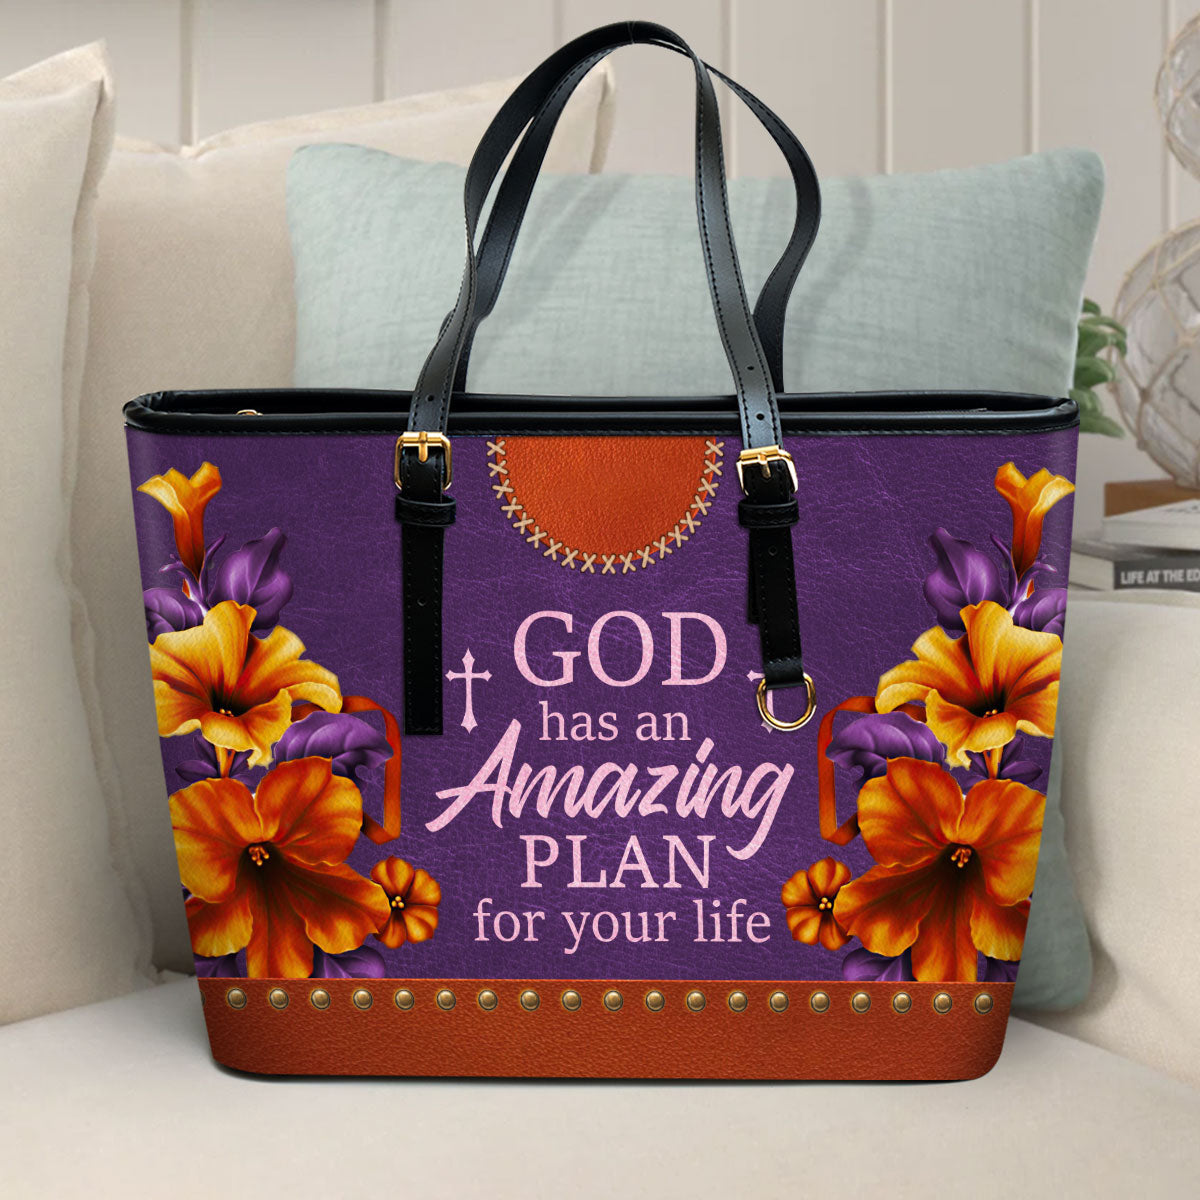 God Has An Amazing Plan For Your Life Large Leather Tote Bag Lily And Cross - Christ Gifts For Religious Women - Best Mother's Day Gifts